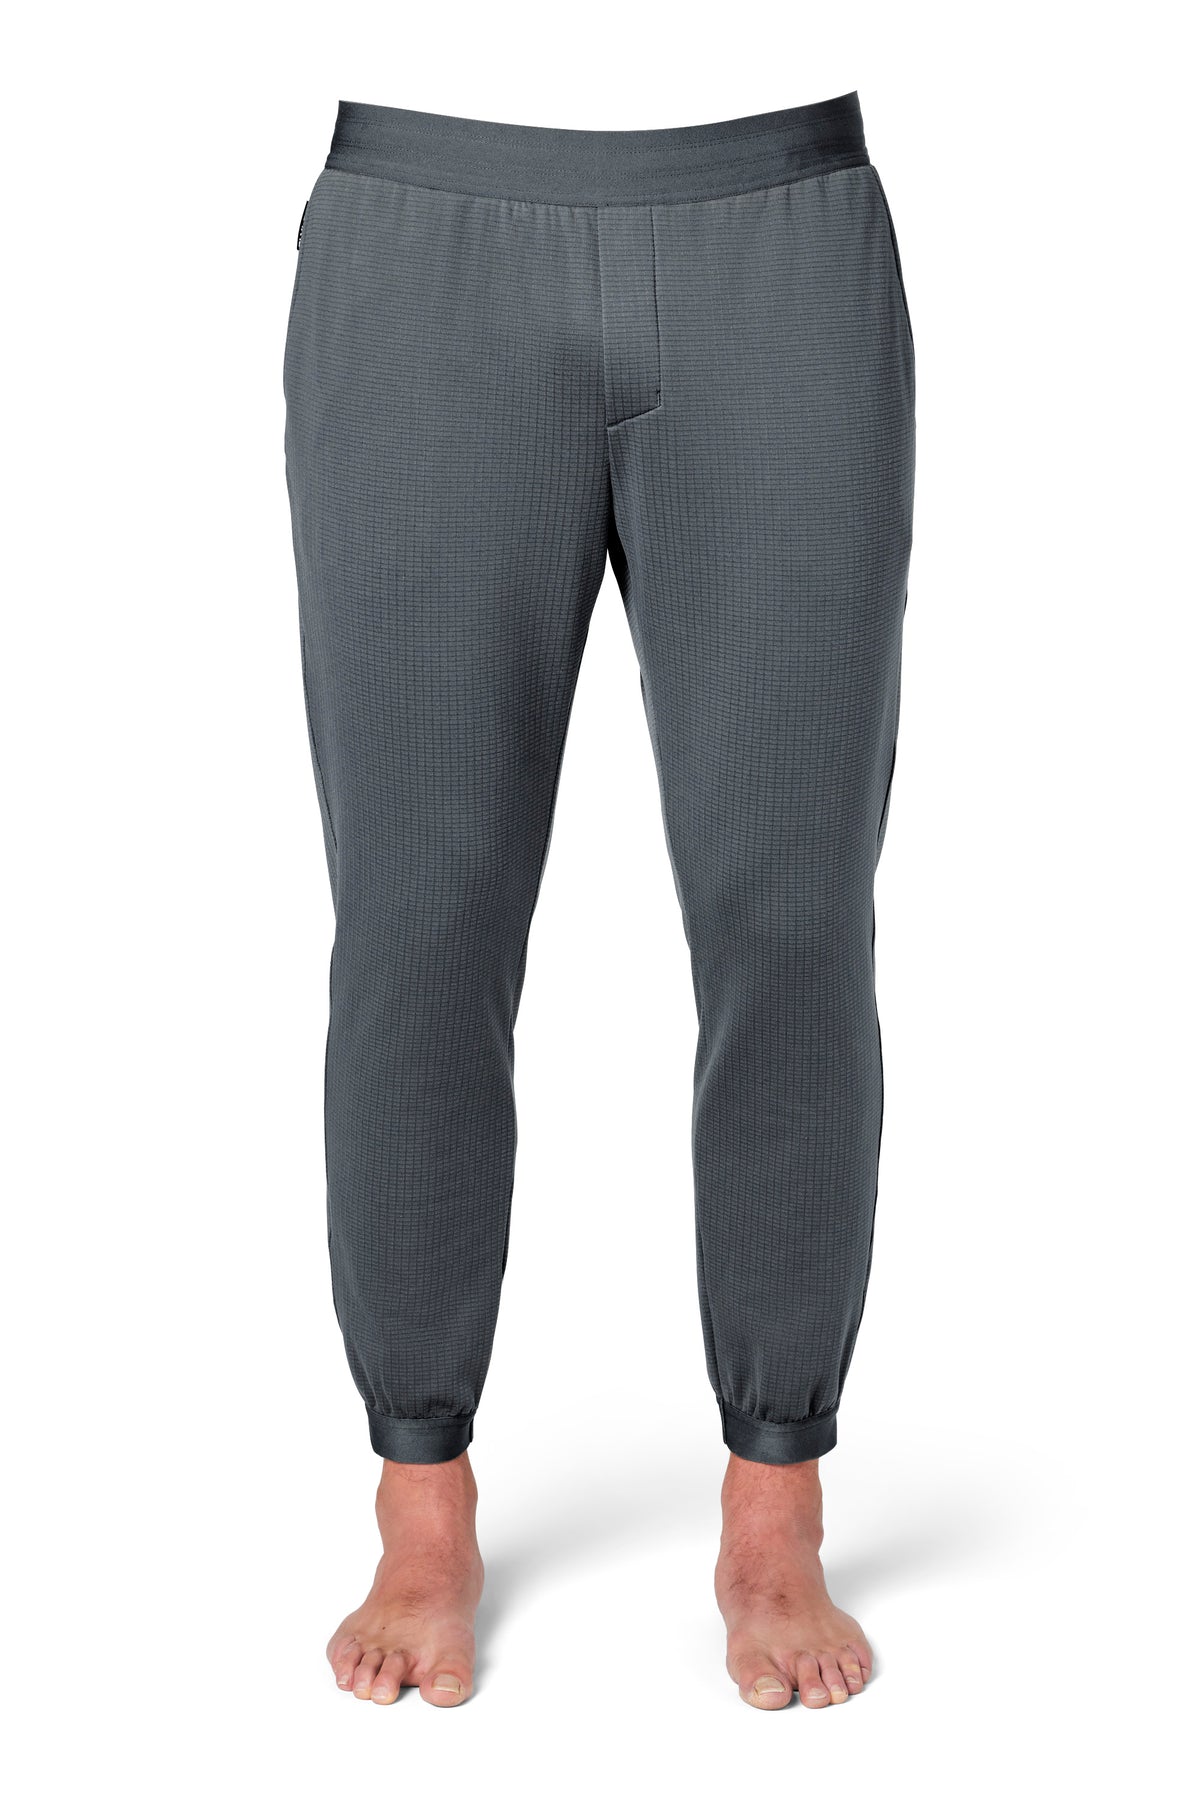 Under Armour Recovery Sleepwear Jogger - Women's - Clothing